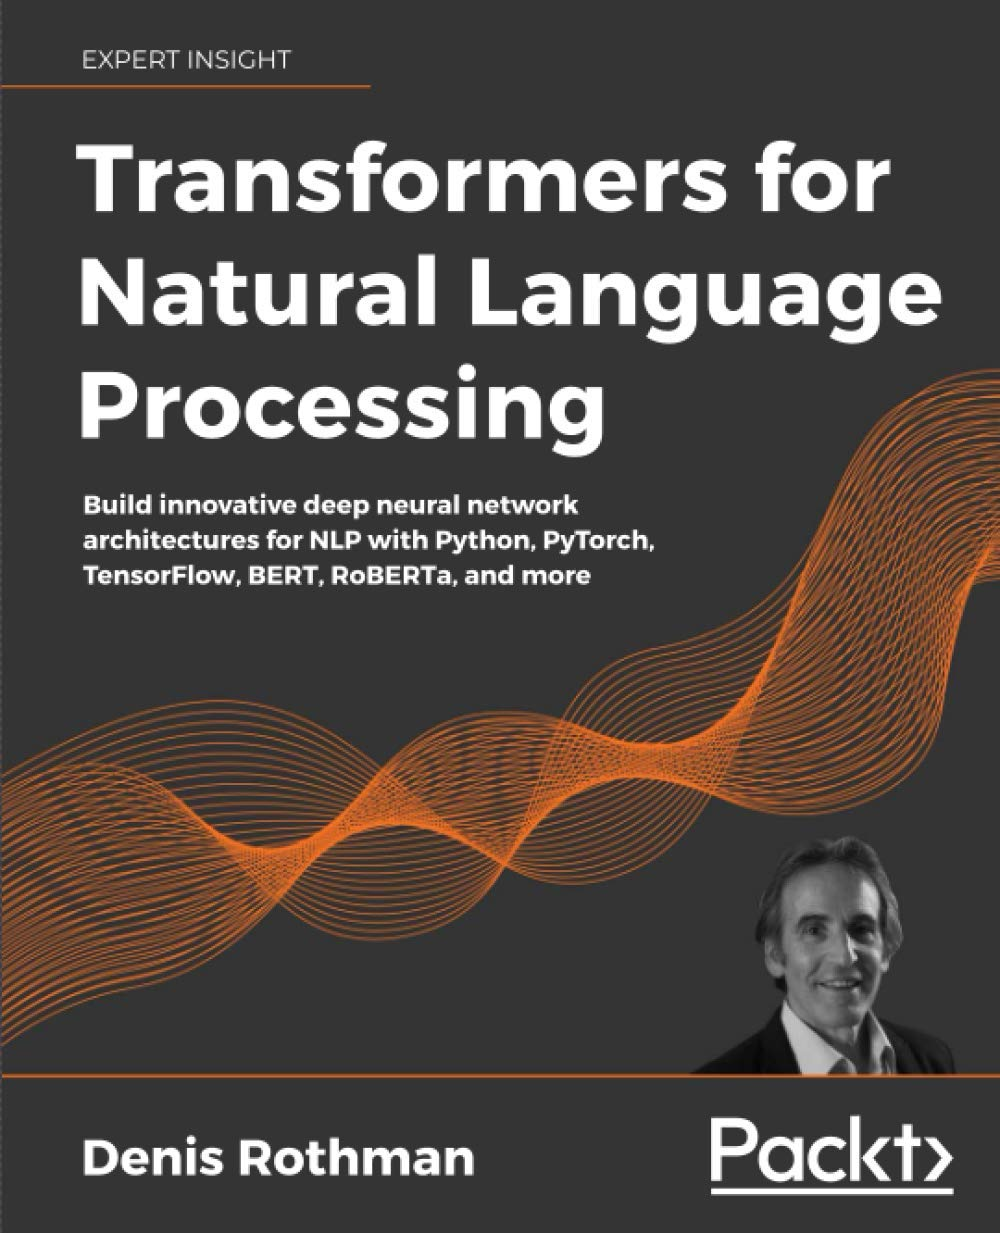 <a href=https://www.amazon.com/Transformers-Natural-Language-Processing-architectures/dp/1800565798 target=_blank rel=noopener noreferrer nofollow>Rothman. Transformers for Natural Language Processing</a>